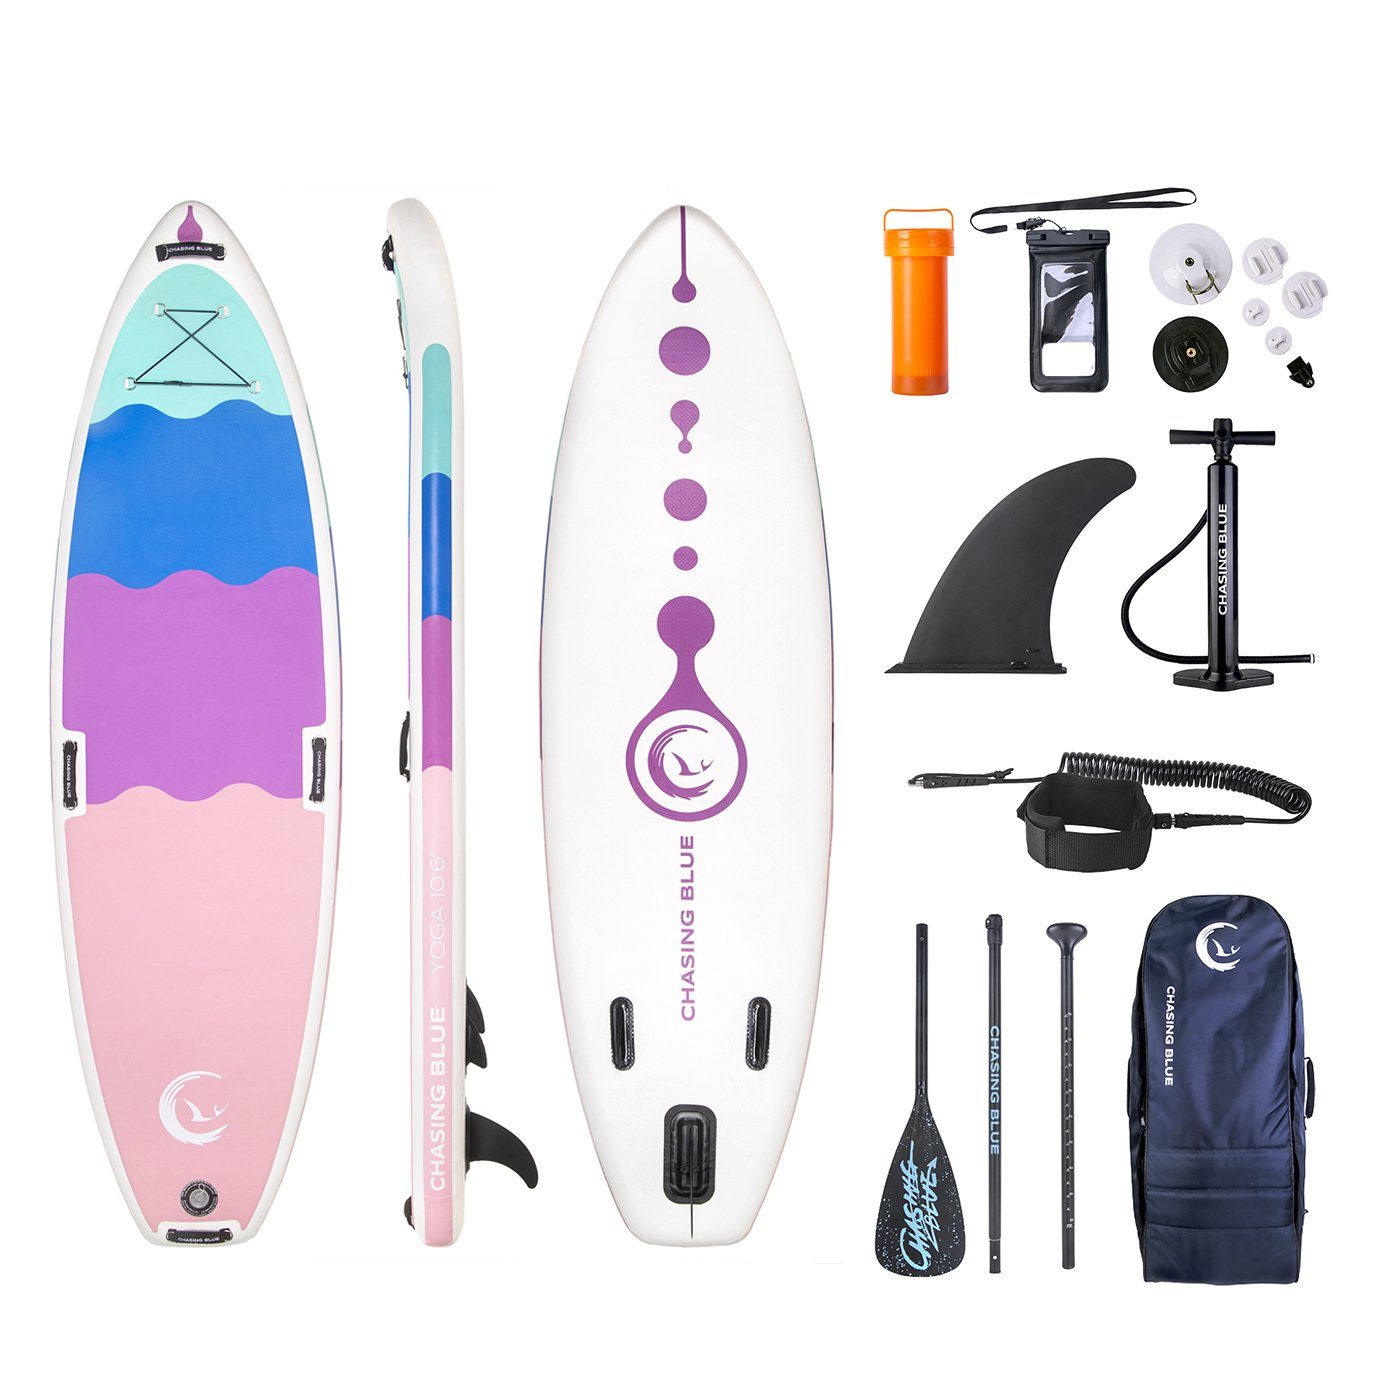 SYNERGY - YOGA iSUP BOARD OutdoorMaster 